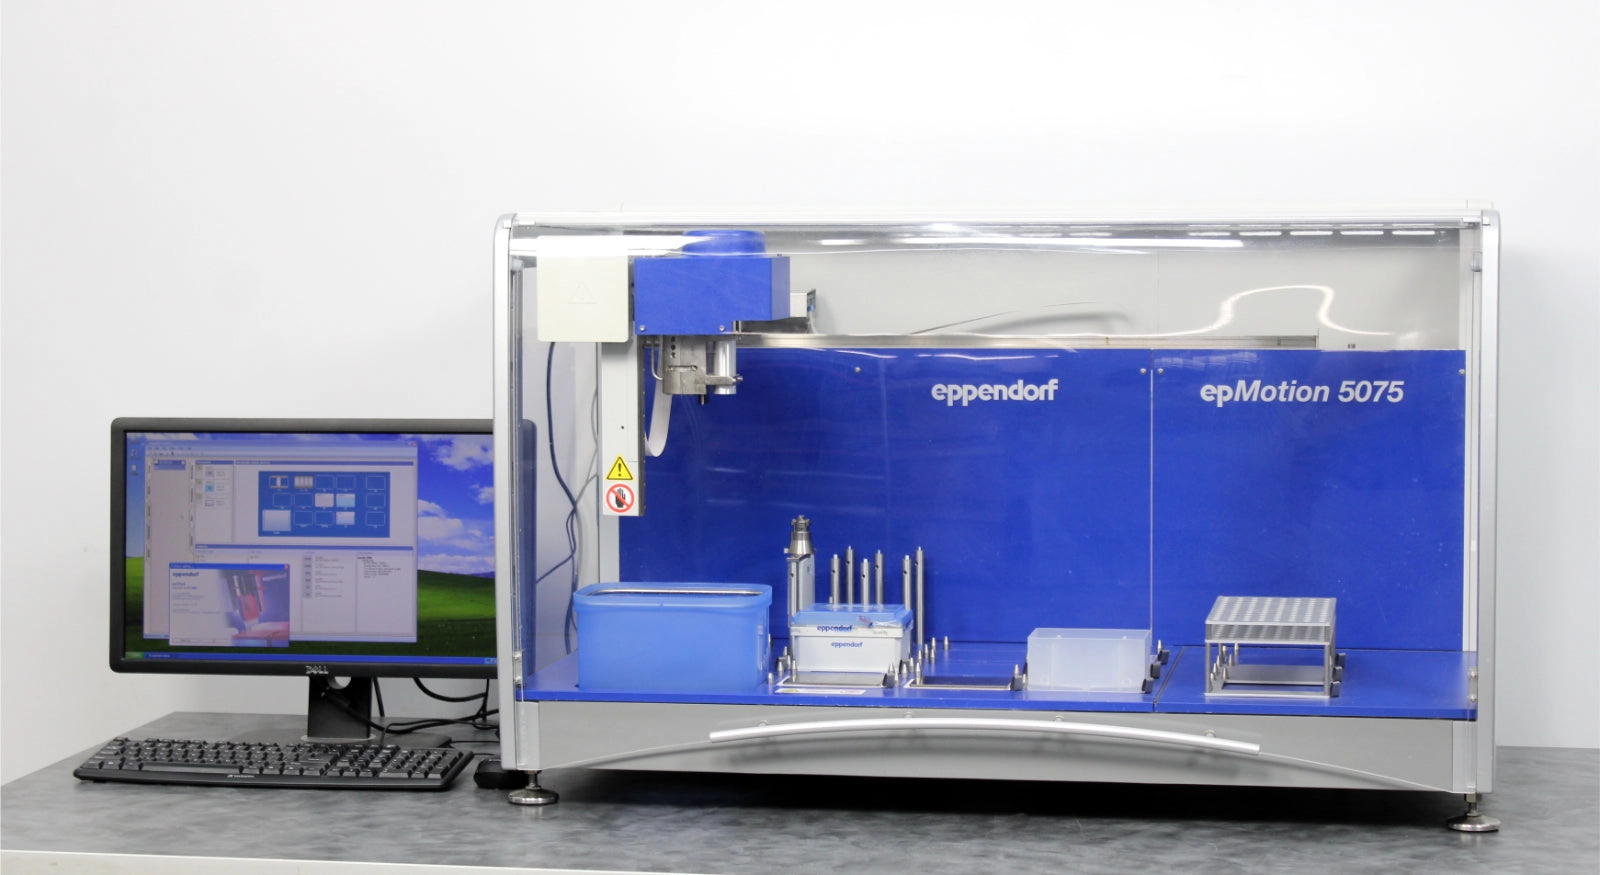 Eppendorf epMotion 5075 Liquid Handler Workstation with PC and epBlue Software